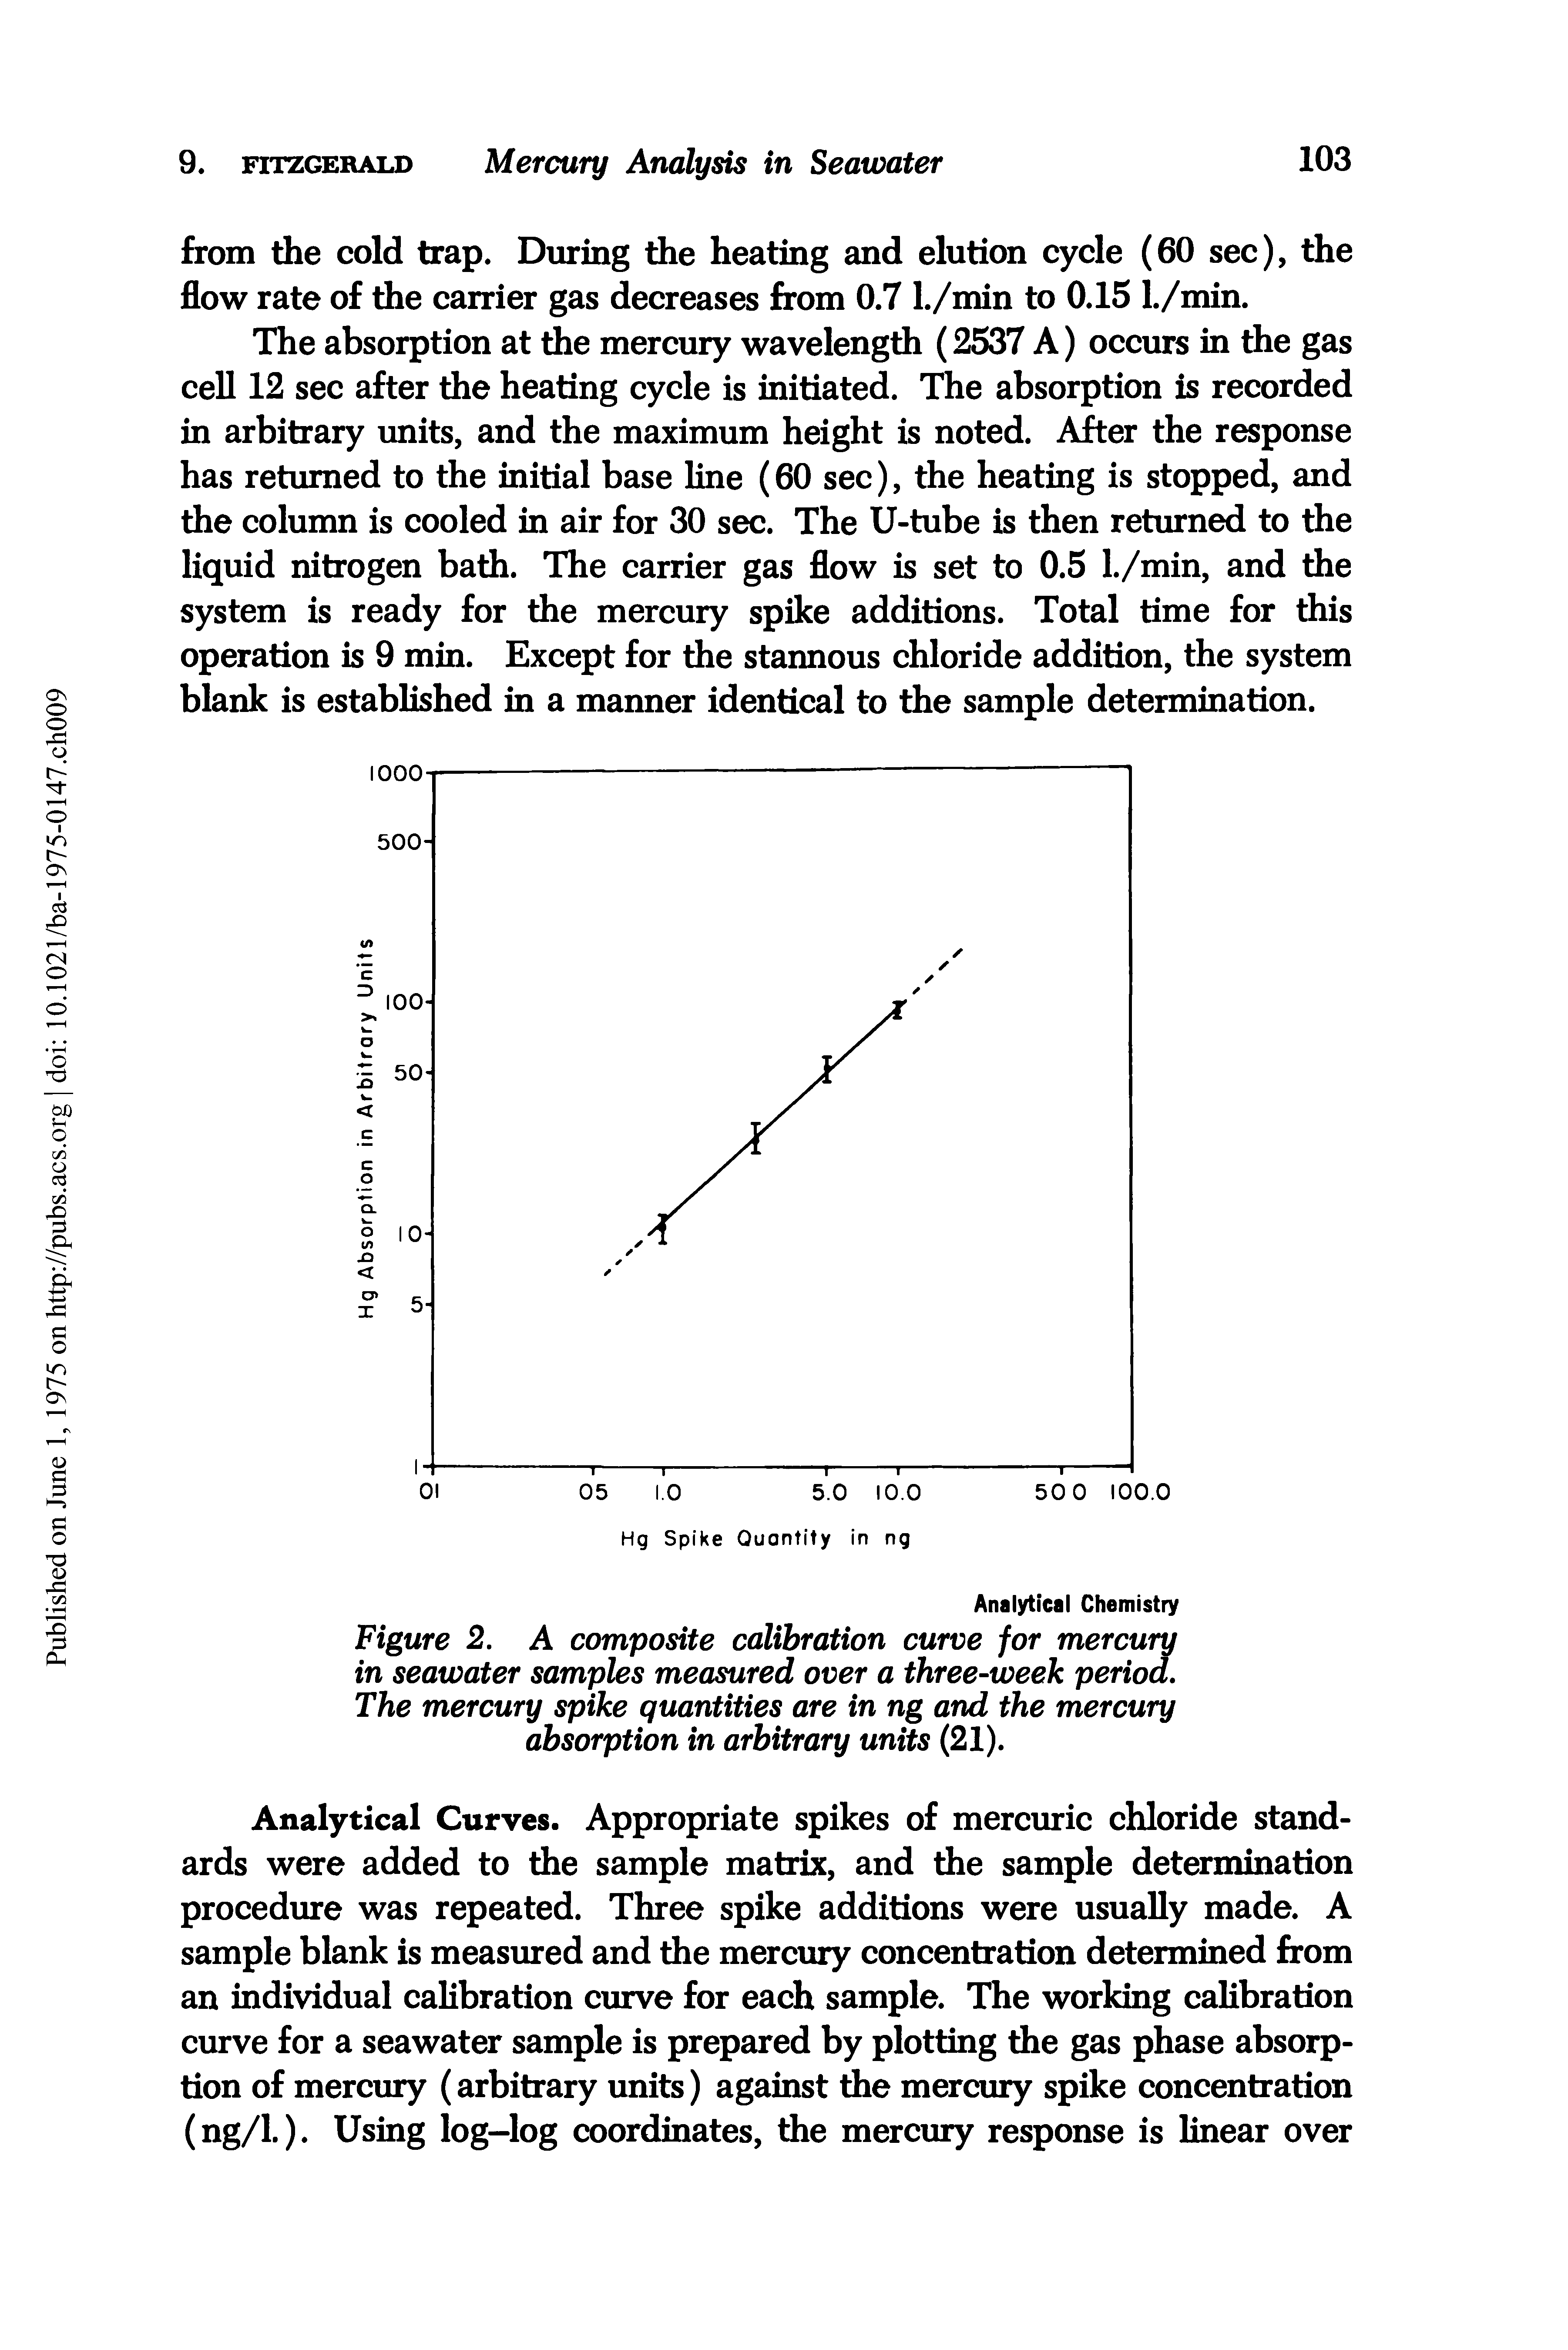 Figure 2. A composite calibration curve for mercury in seawater samples measured over a three-week period. The mercury spike quantities are in ng and the mercury absorption in arbitrary units (21).